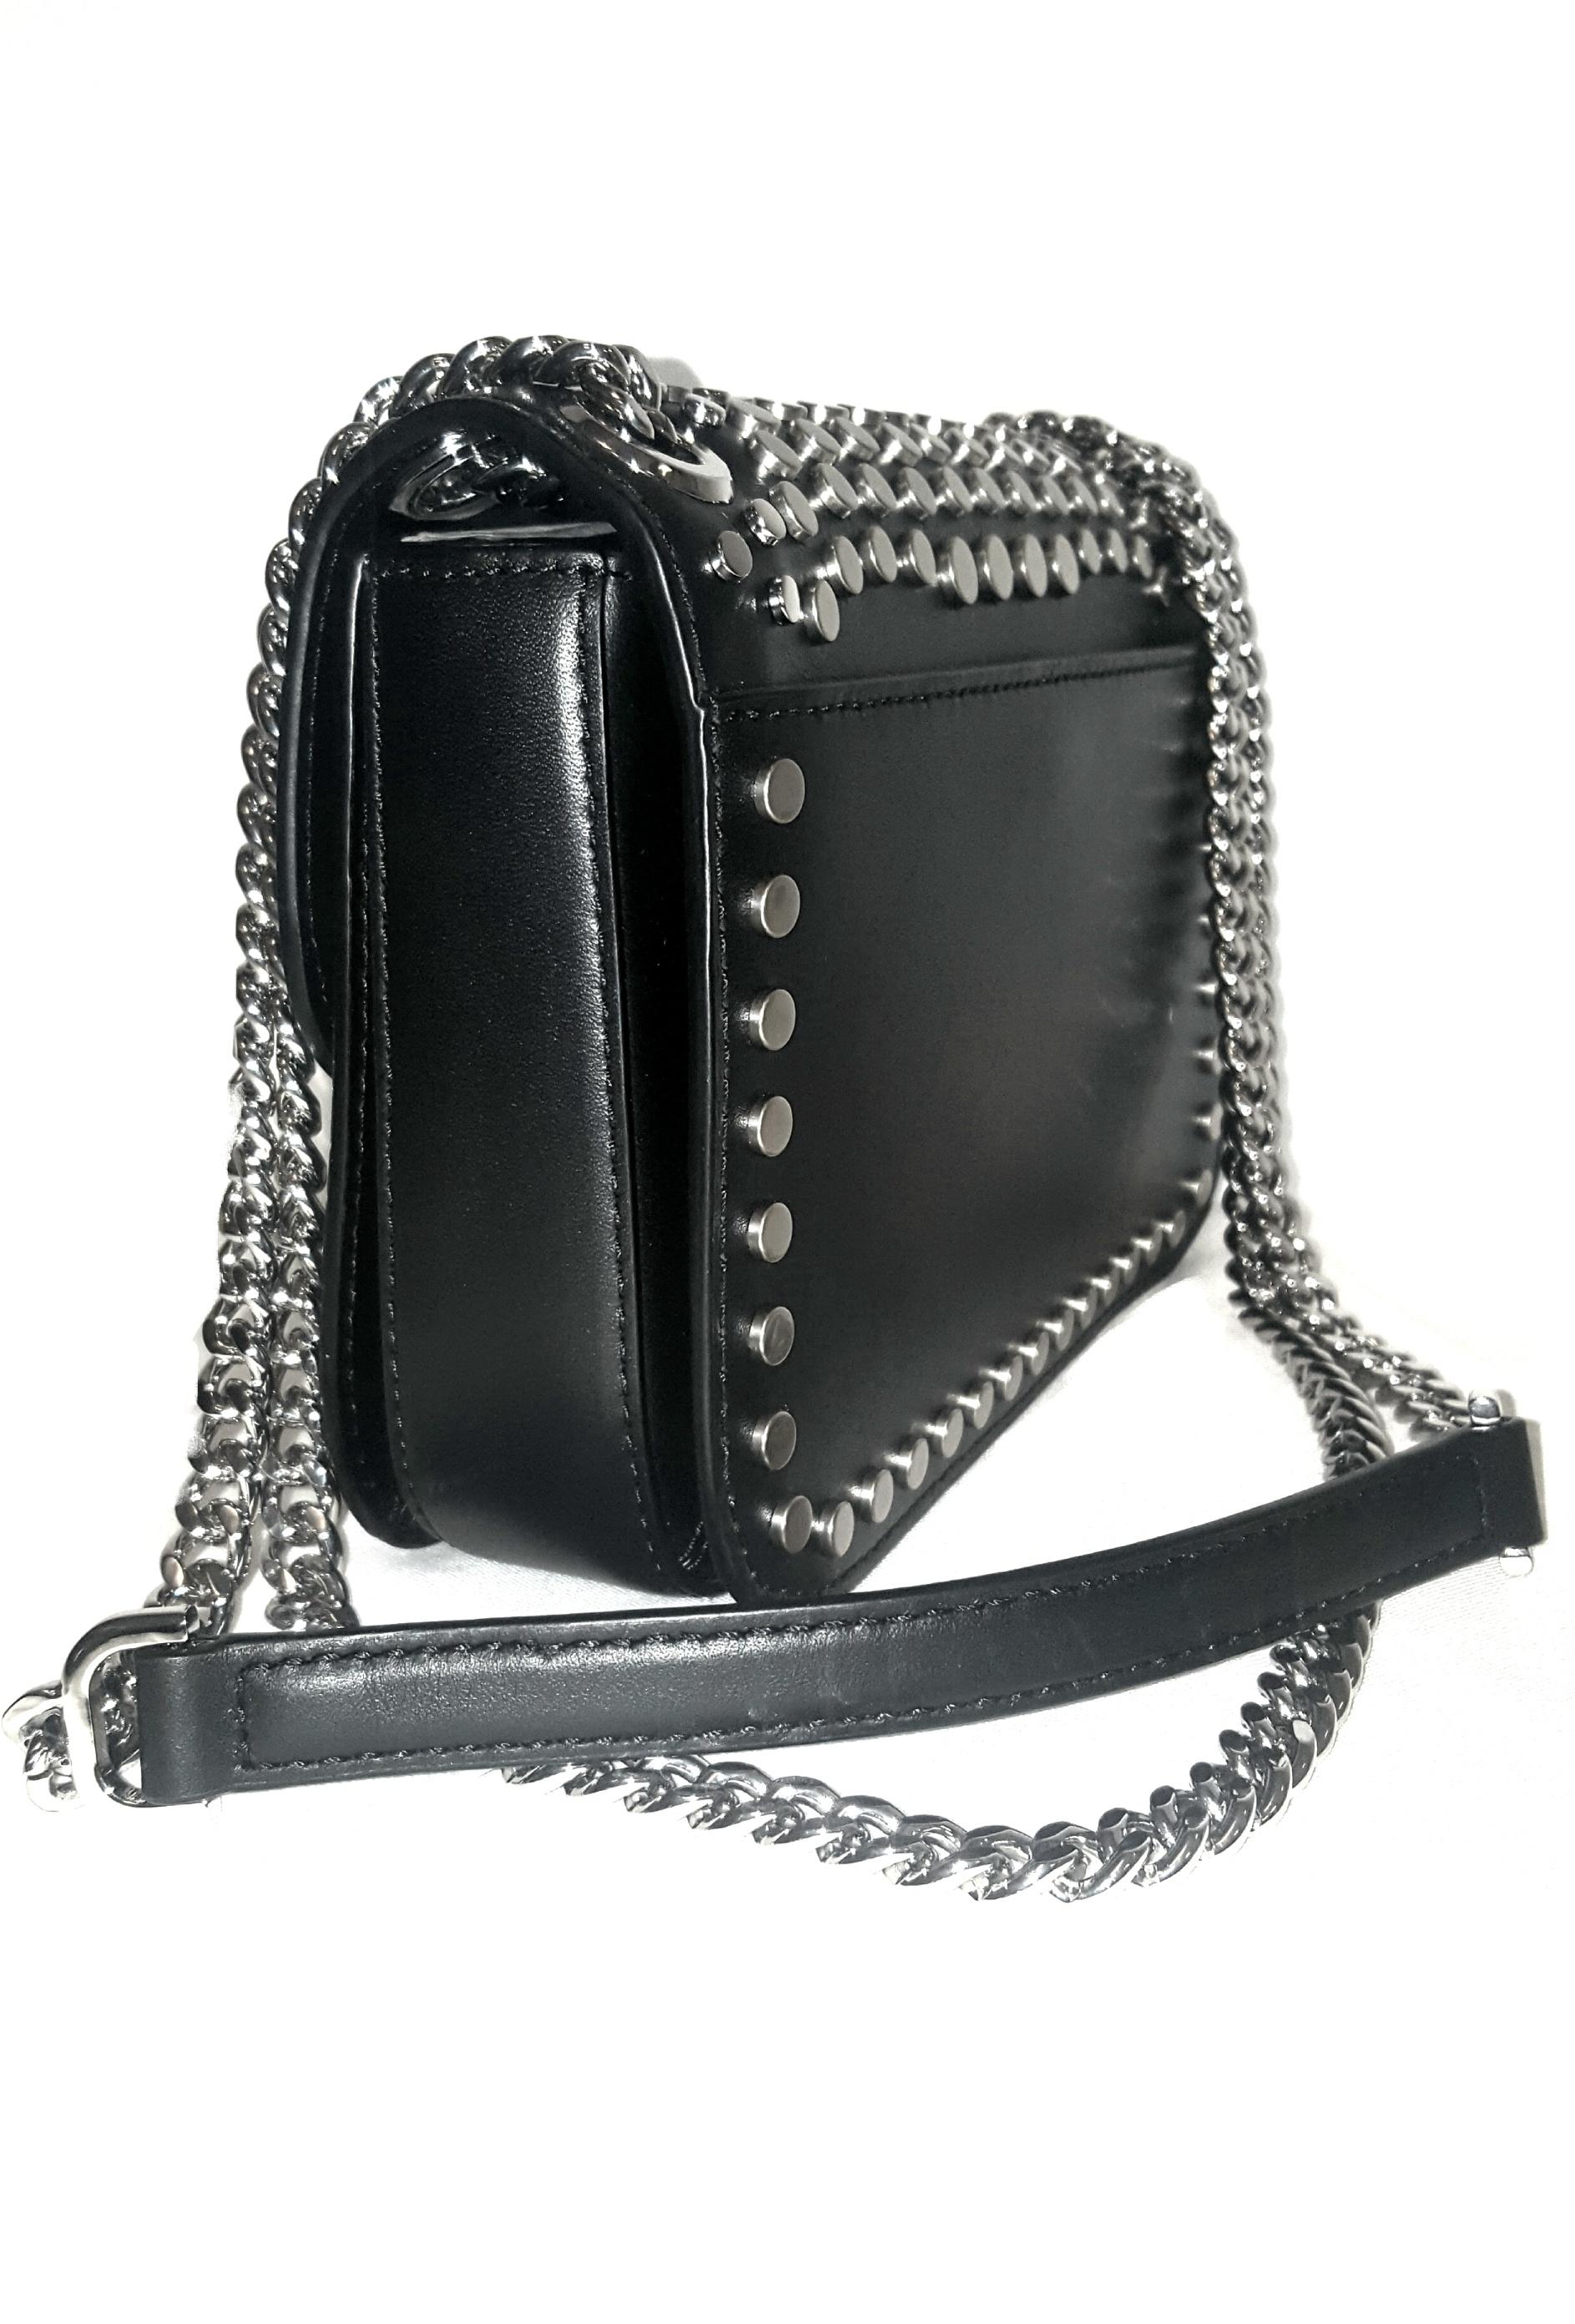 Michael Kors Jenkins black leather bag with silver tone studs includes a single shoulder silver tone chain link strap.   The strap can be used as a single for the shoulder or crossbody or doubled as a handbag.   This flap bag contains a cinched